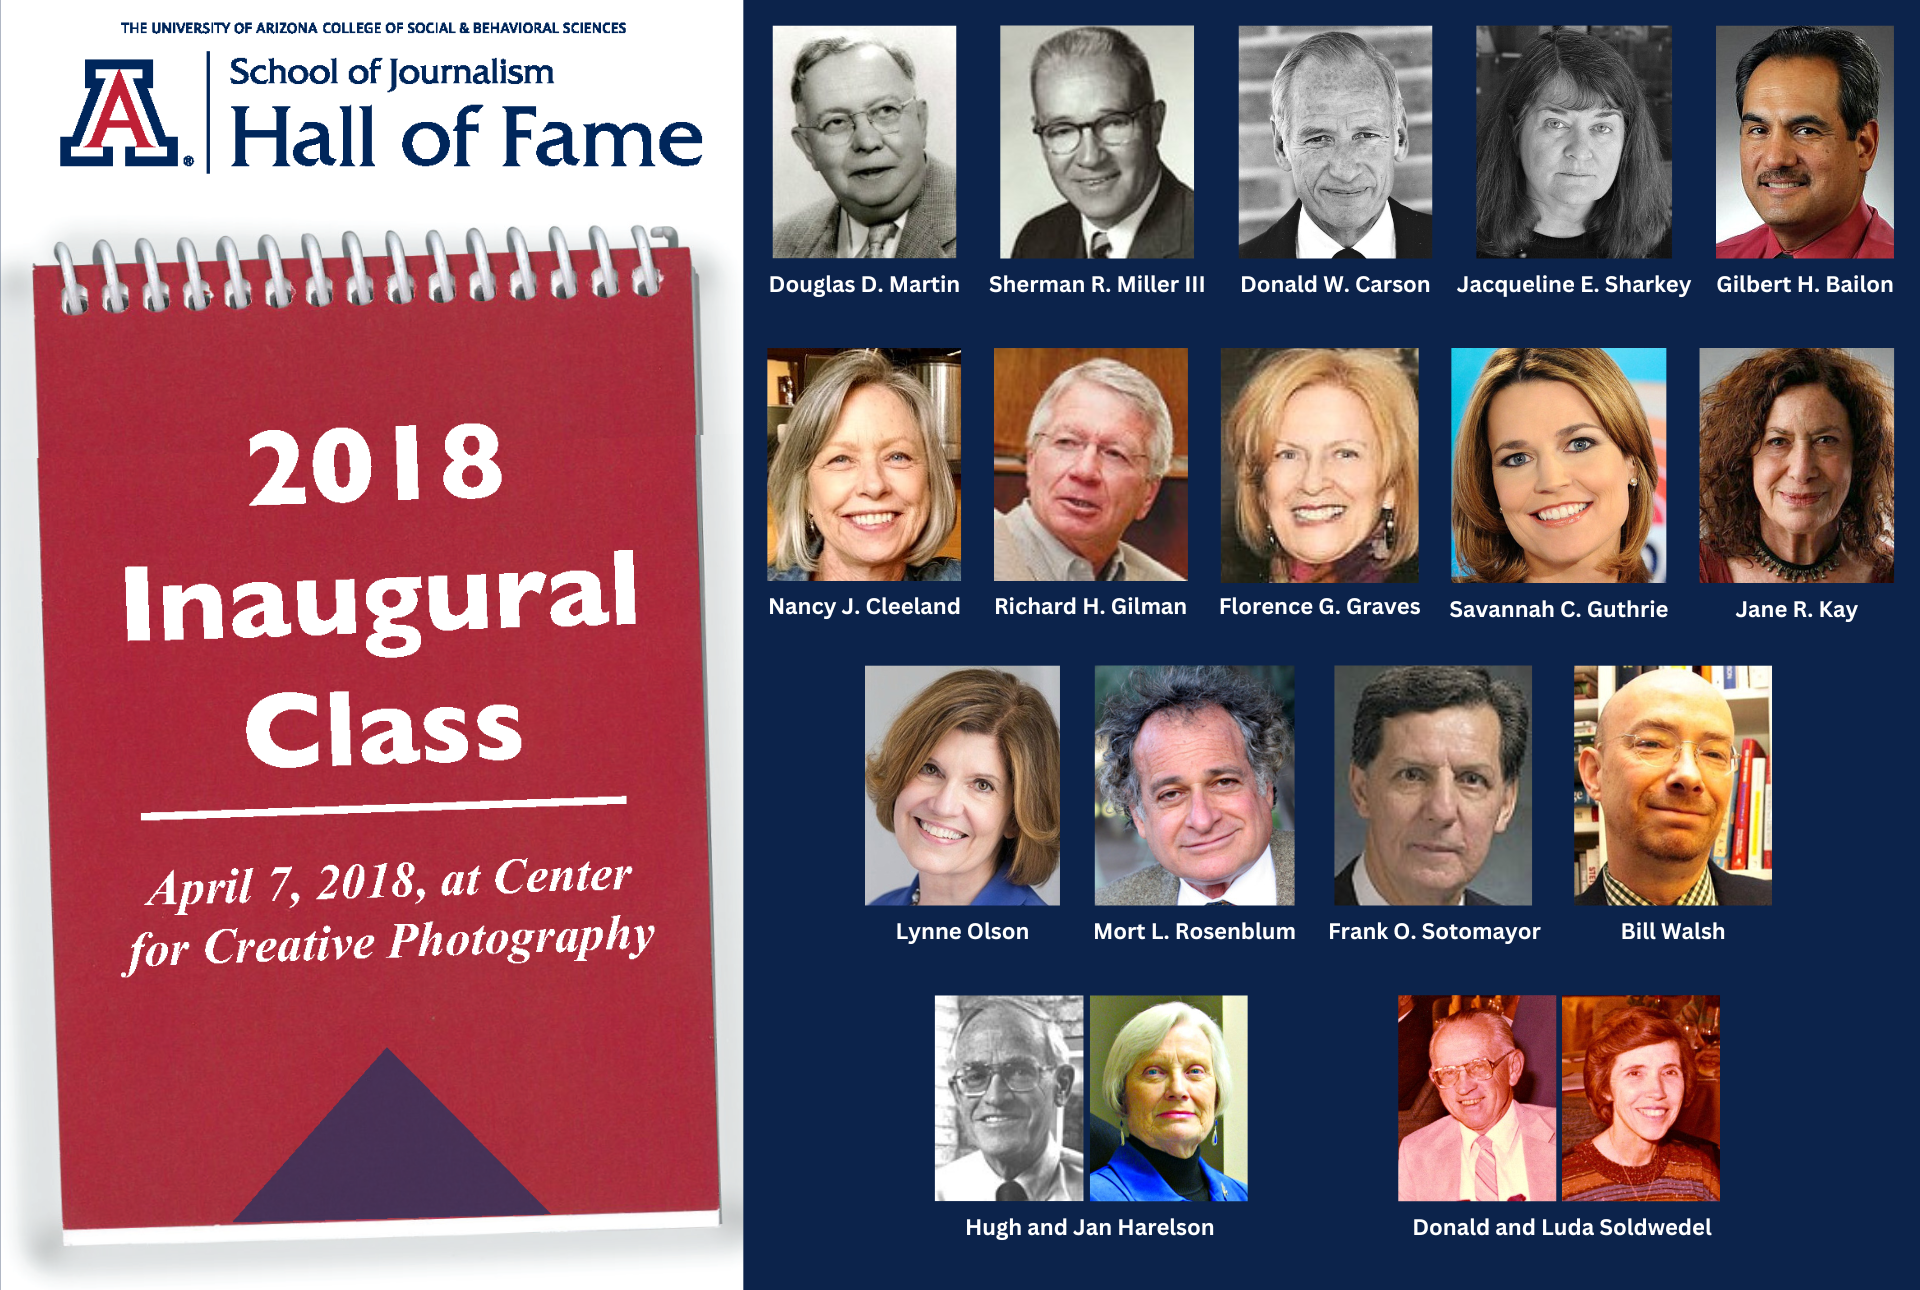 Hall of Fame class of 2018 inductees 